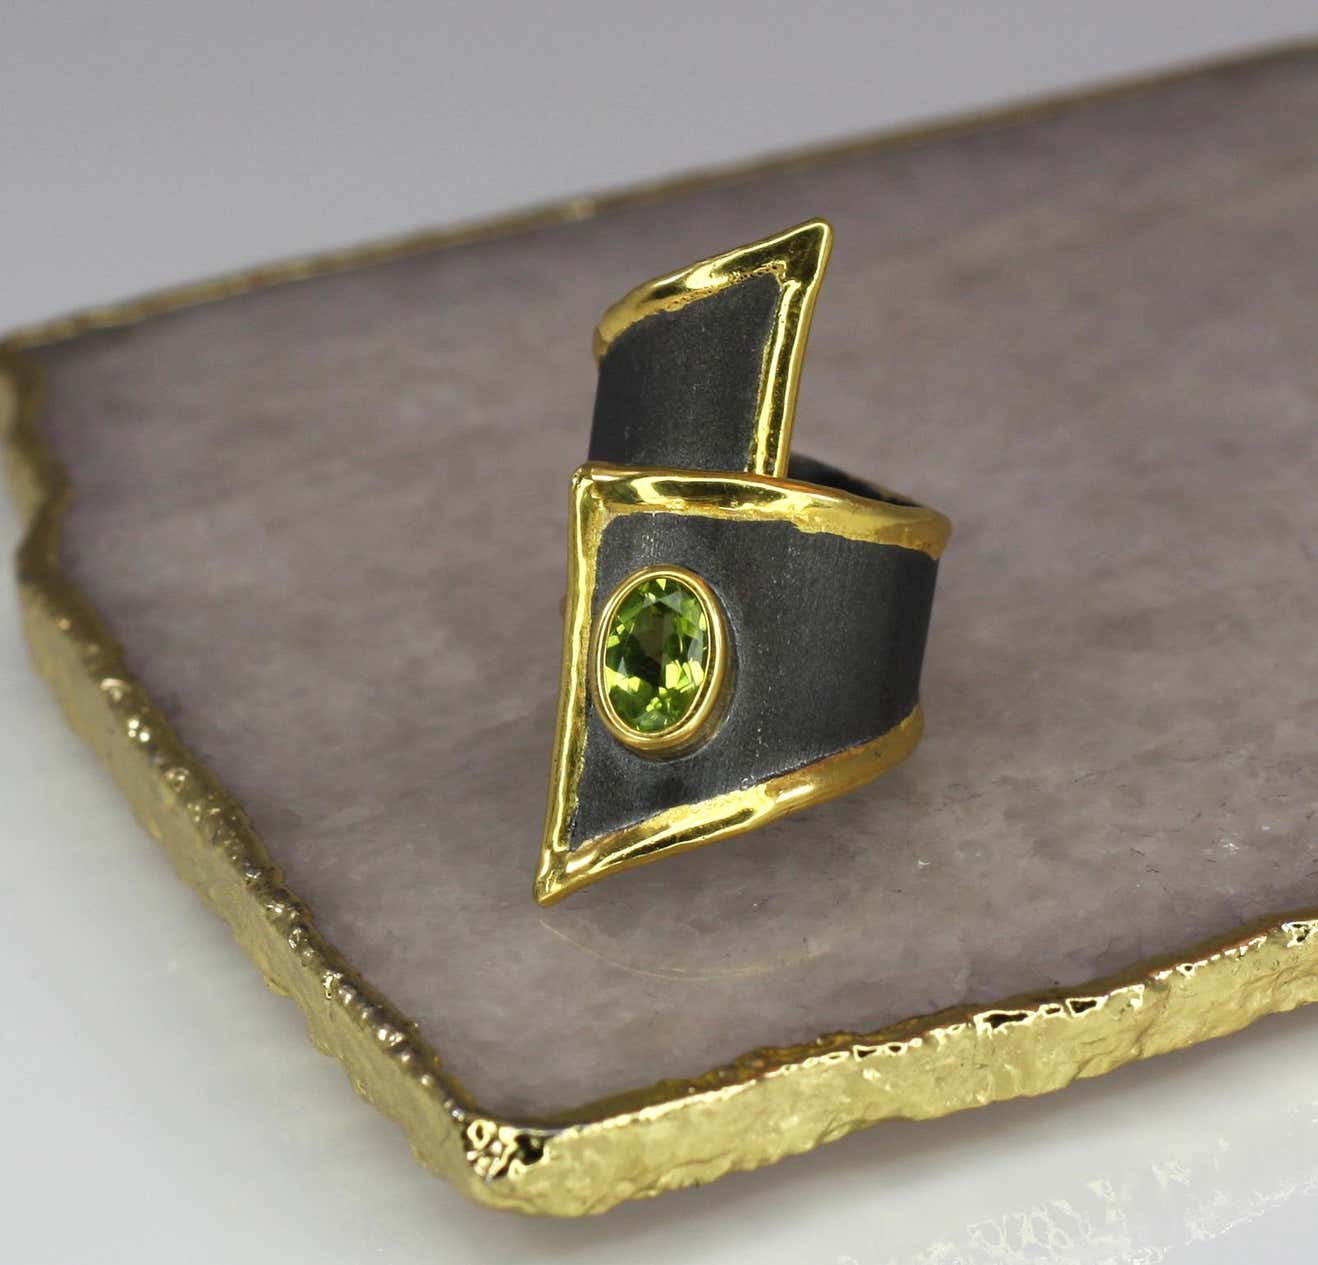 Eclyps 1.35 Carat Peridot Fine Silver Ring with Black Ruthenium and Gold